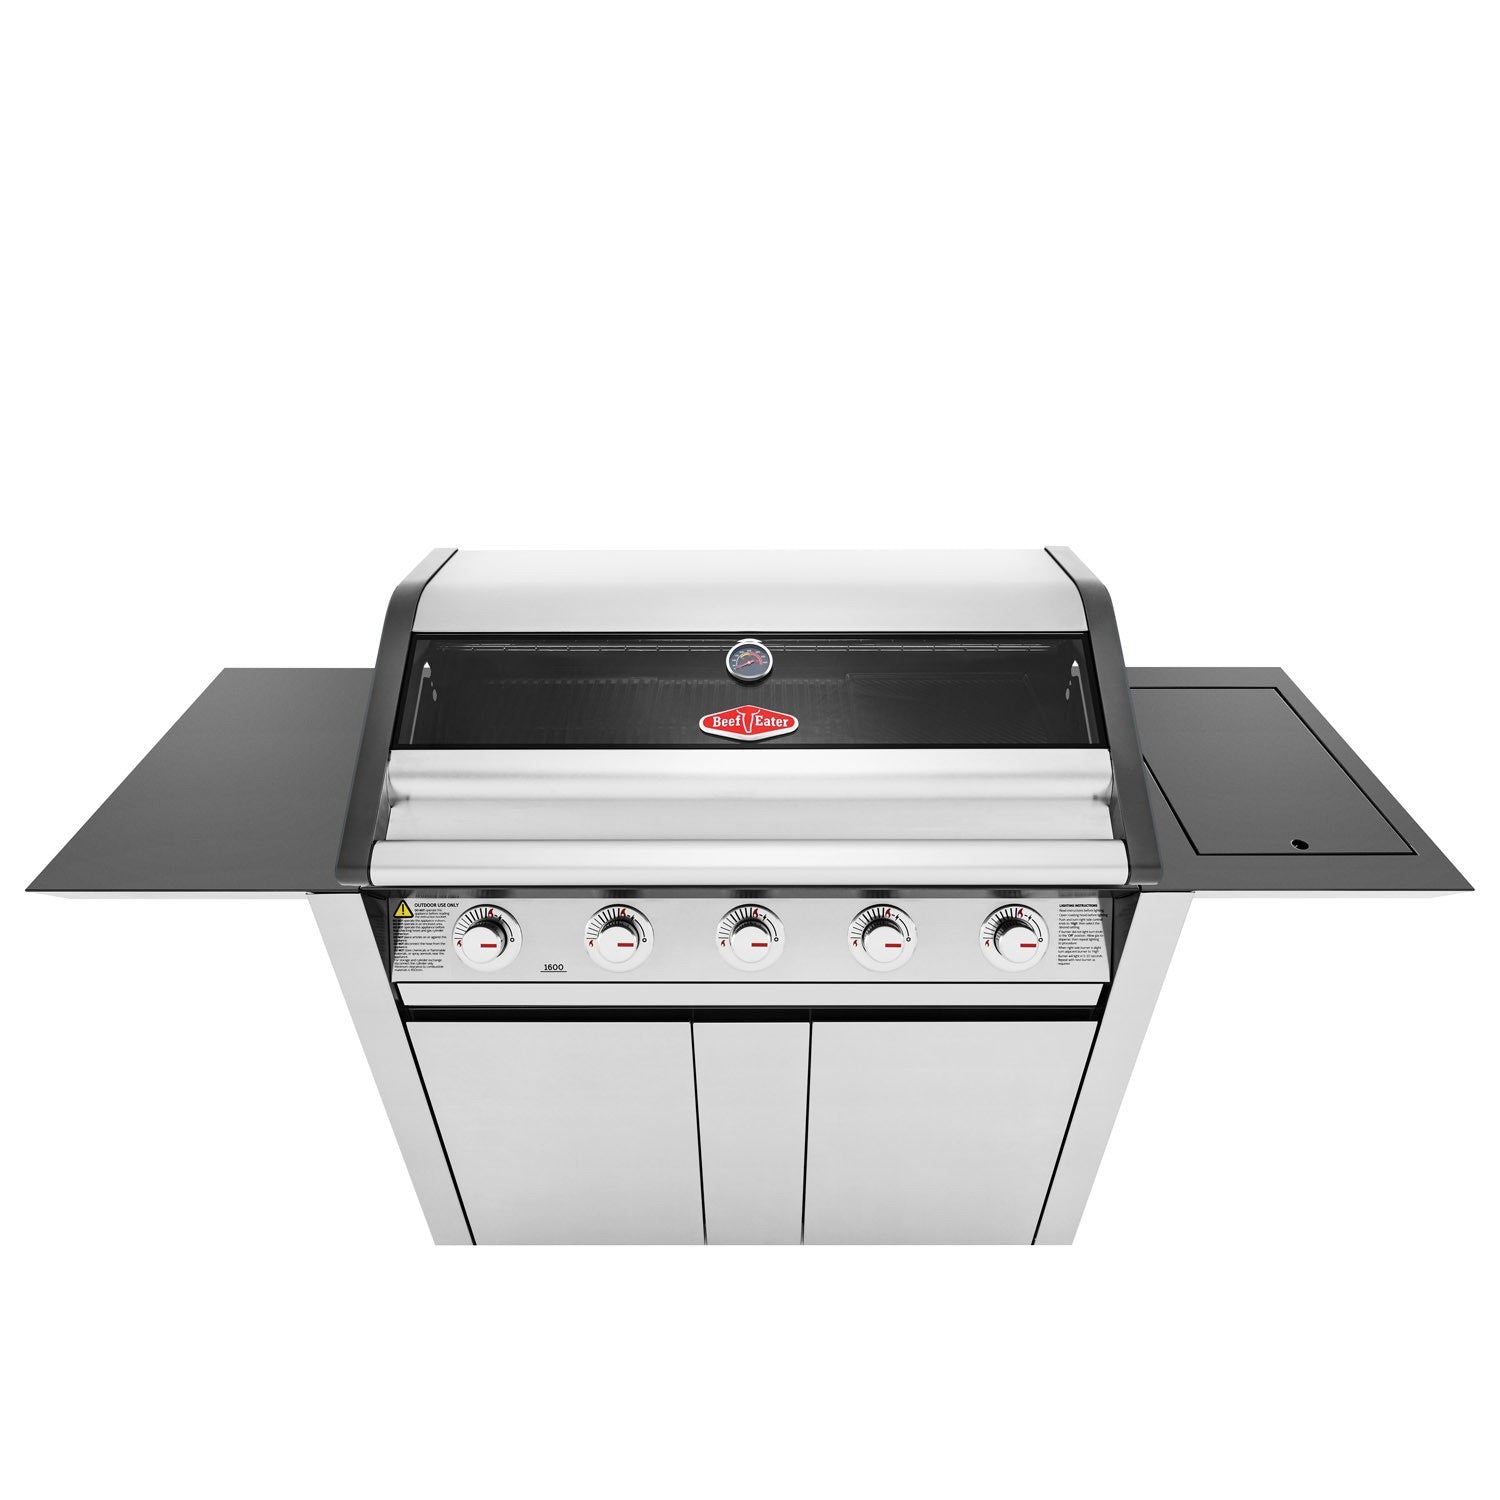 Beefeater 1600S Series - 5 Burner Gas Barbecue Grill and Trolley